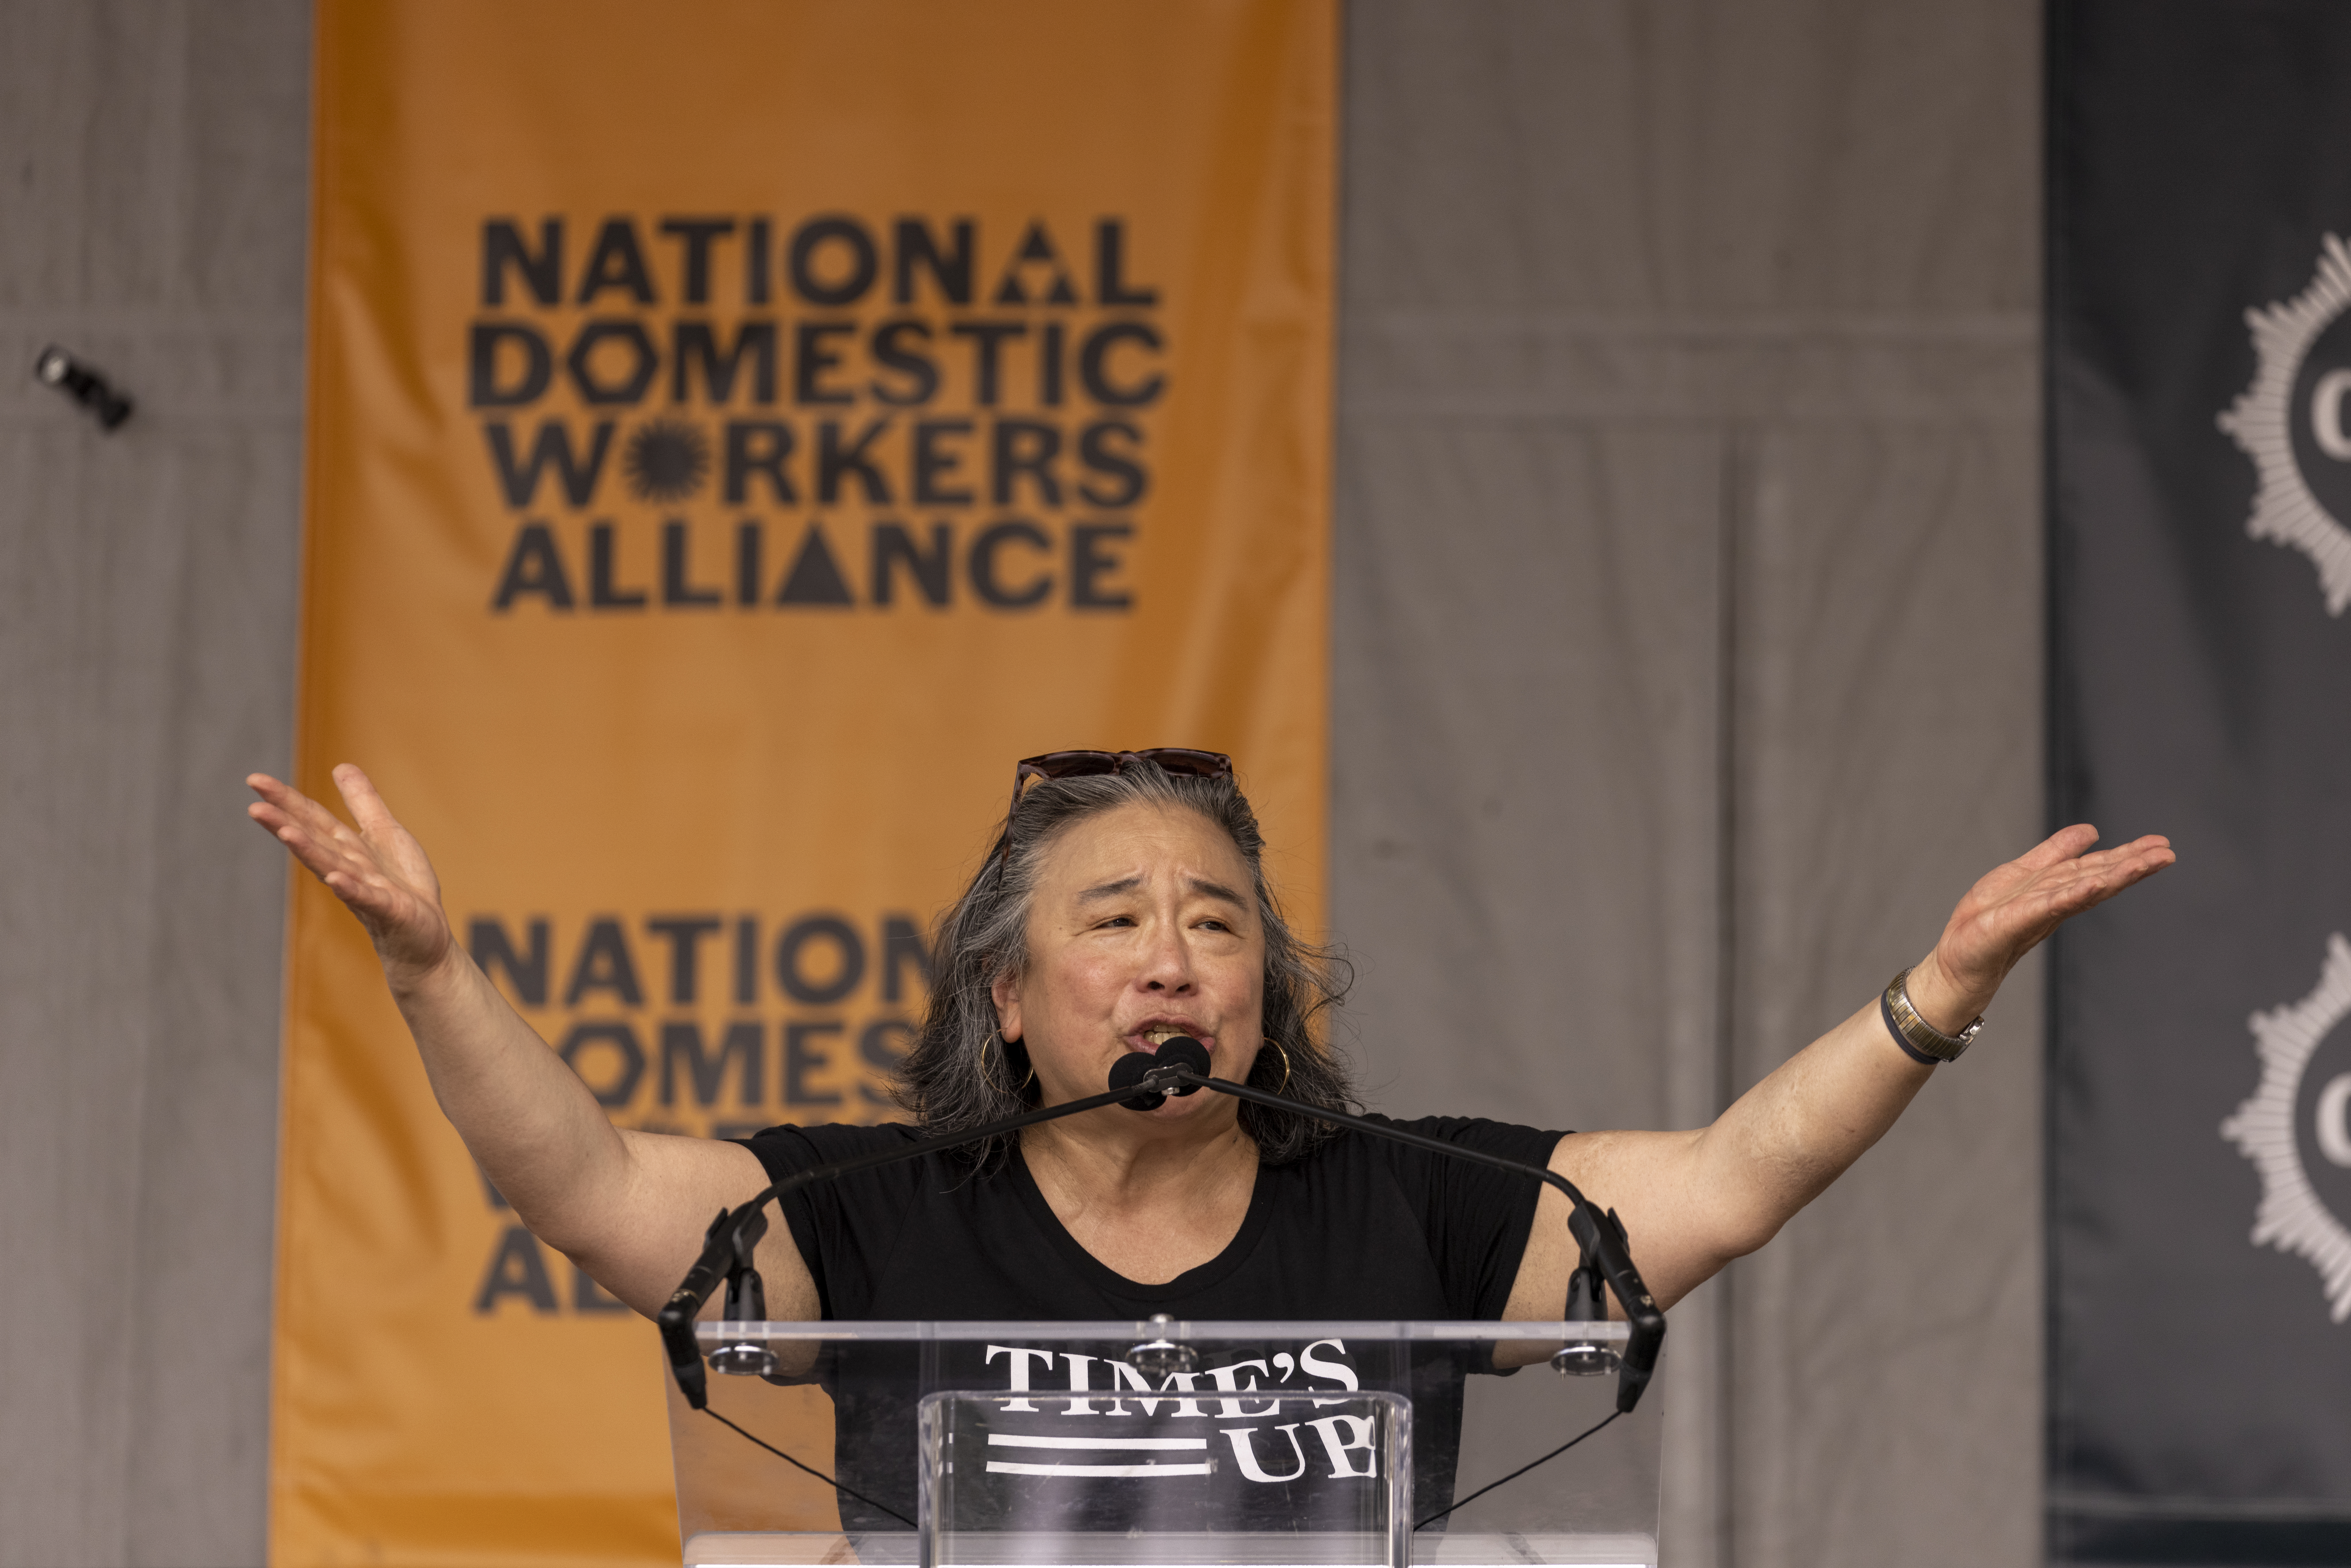 WASHINGTON, DC - JULY 13: Tina Tchen, speaks at Freedom Plaza on July 13, 2021 in Washington, DC. Thousands of care workers marched from the National Mall near the US Capitol, down to Freedom Plaza to rally for workers’ rights and fair pay. (Photo by Tasos Katopodis/Getty Images for Care Can't Wait)